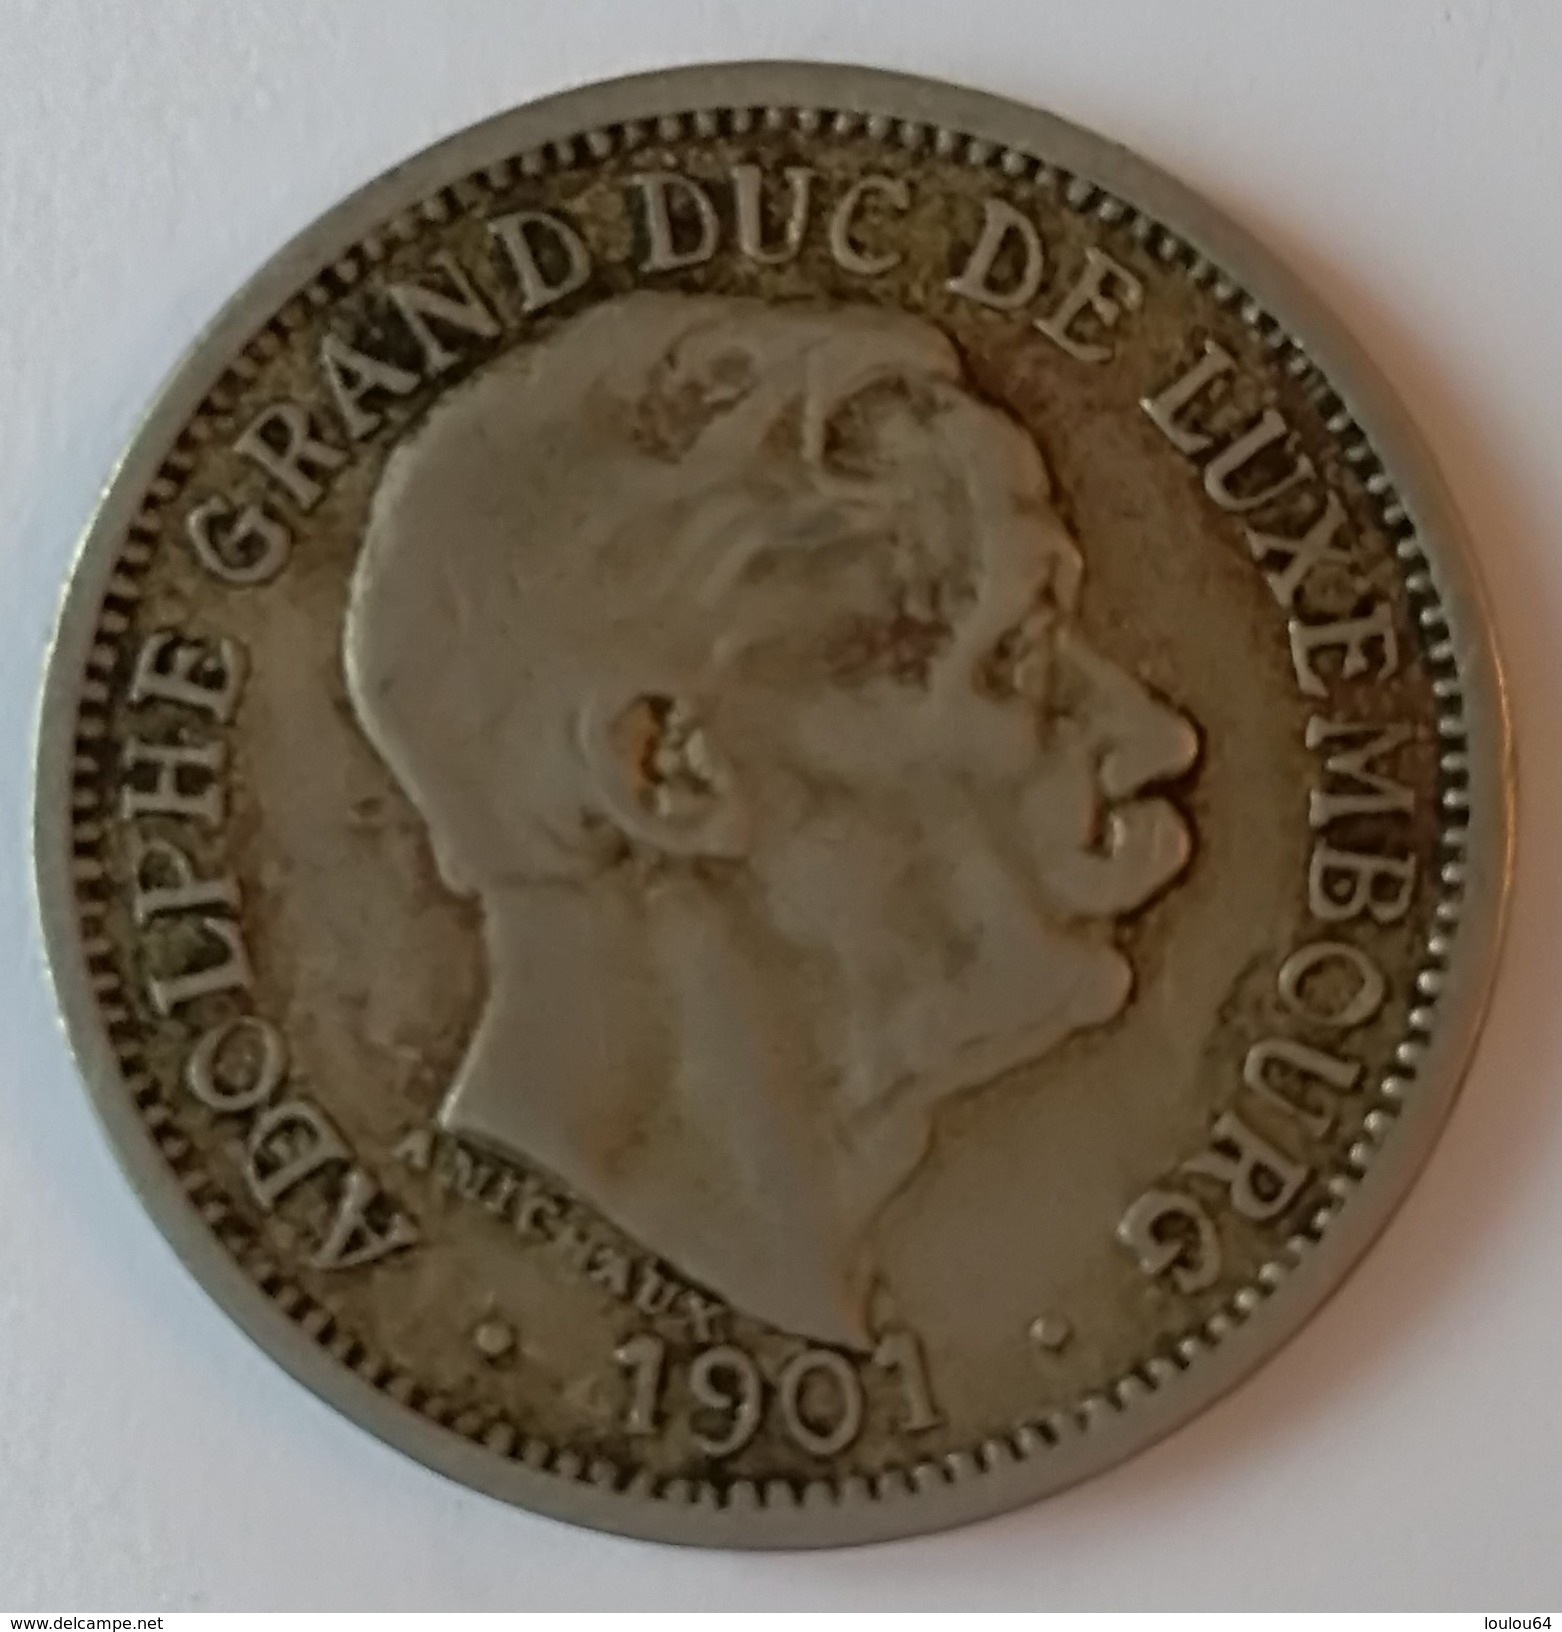 10 Centimes 1901 - ADOLPHE Grand Duc De LUXEMBOURG - - Luxembourg